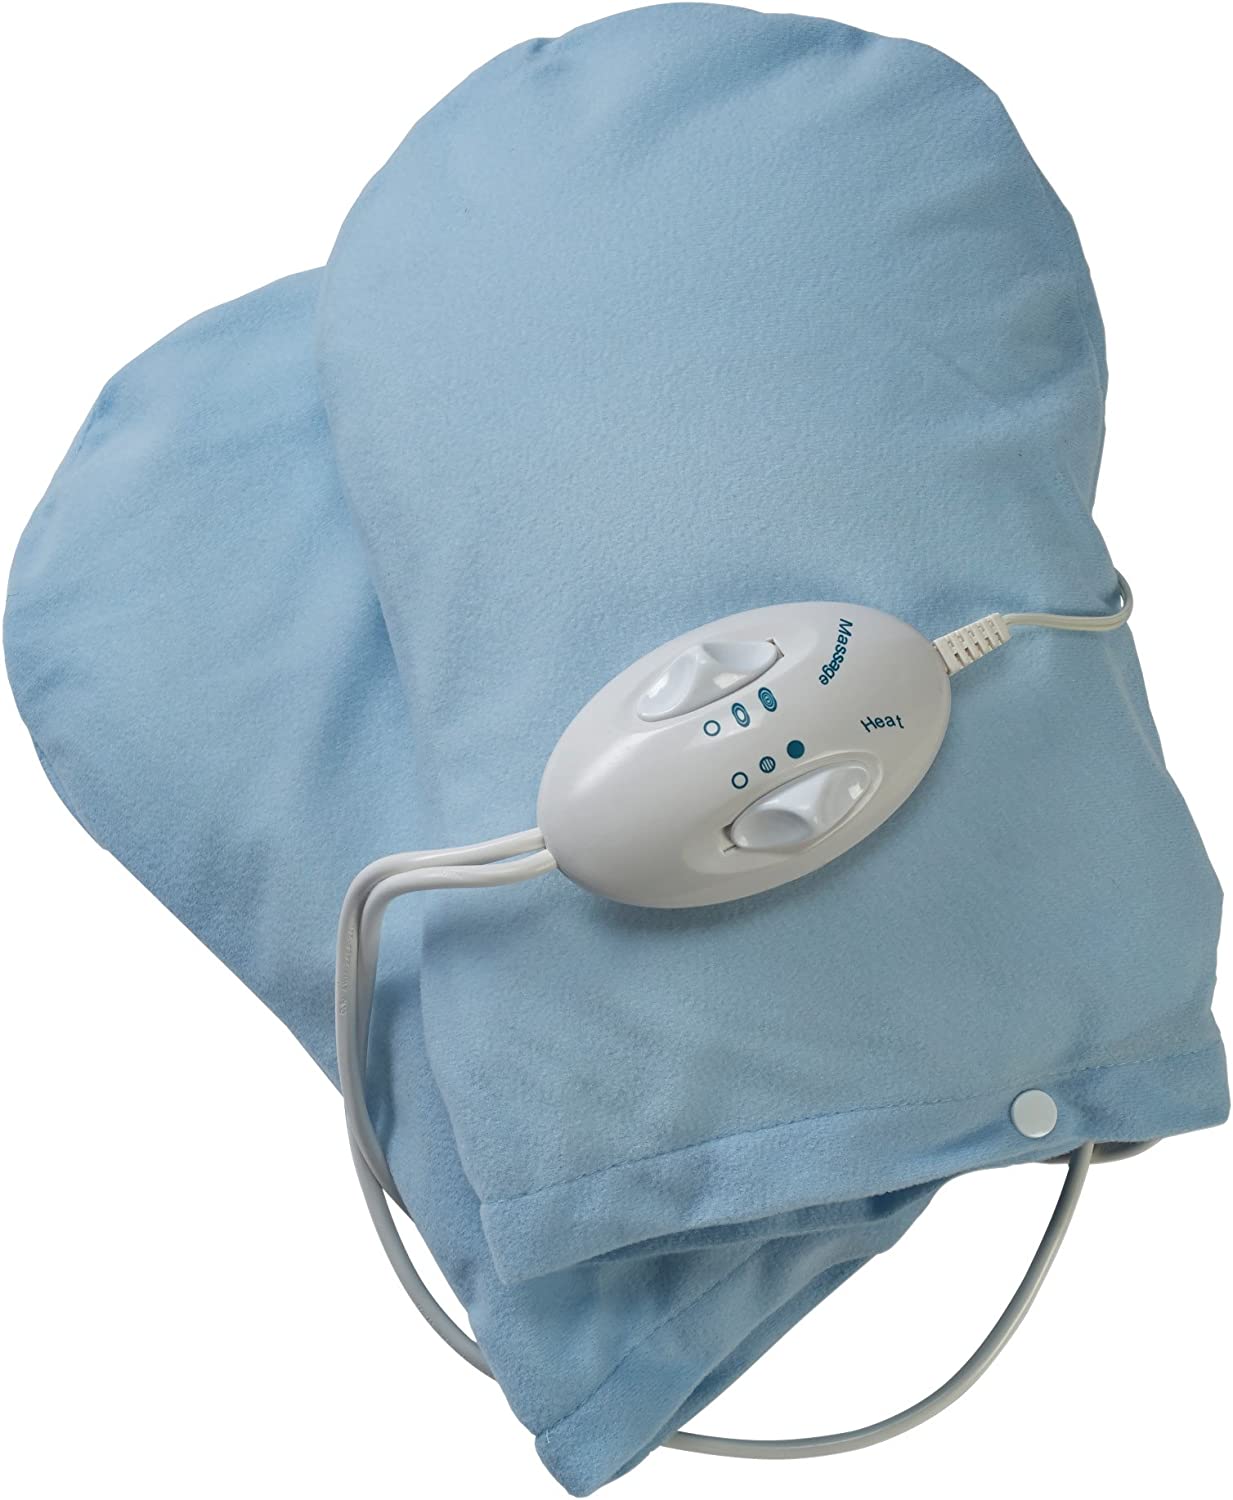 Which Is The Best Heating Pad For Hands For Arthritis